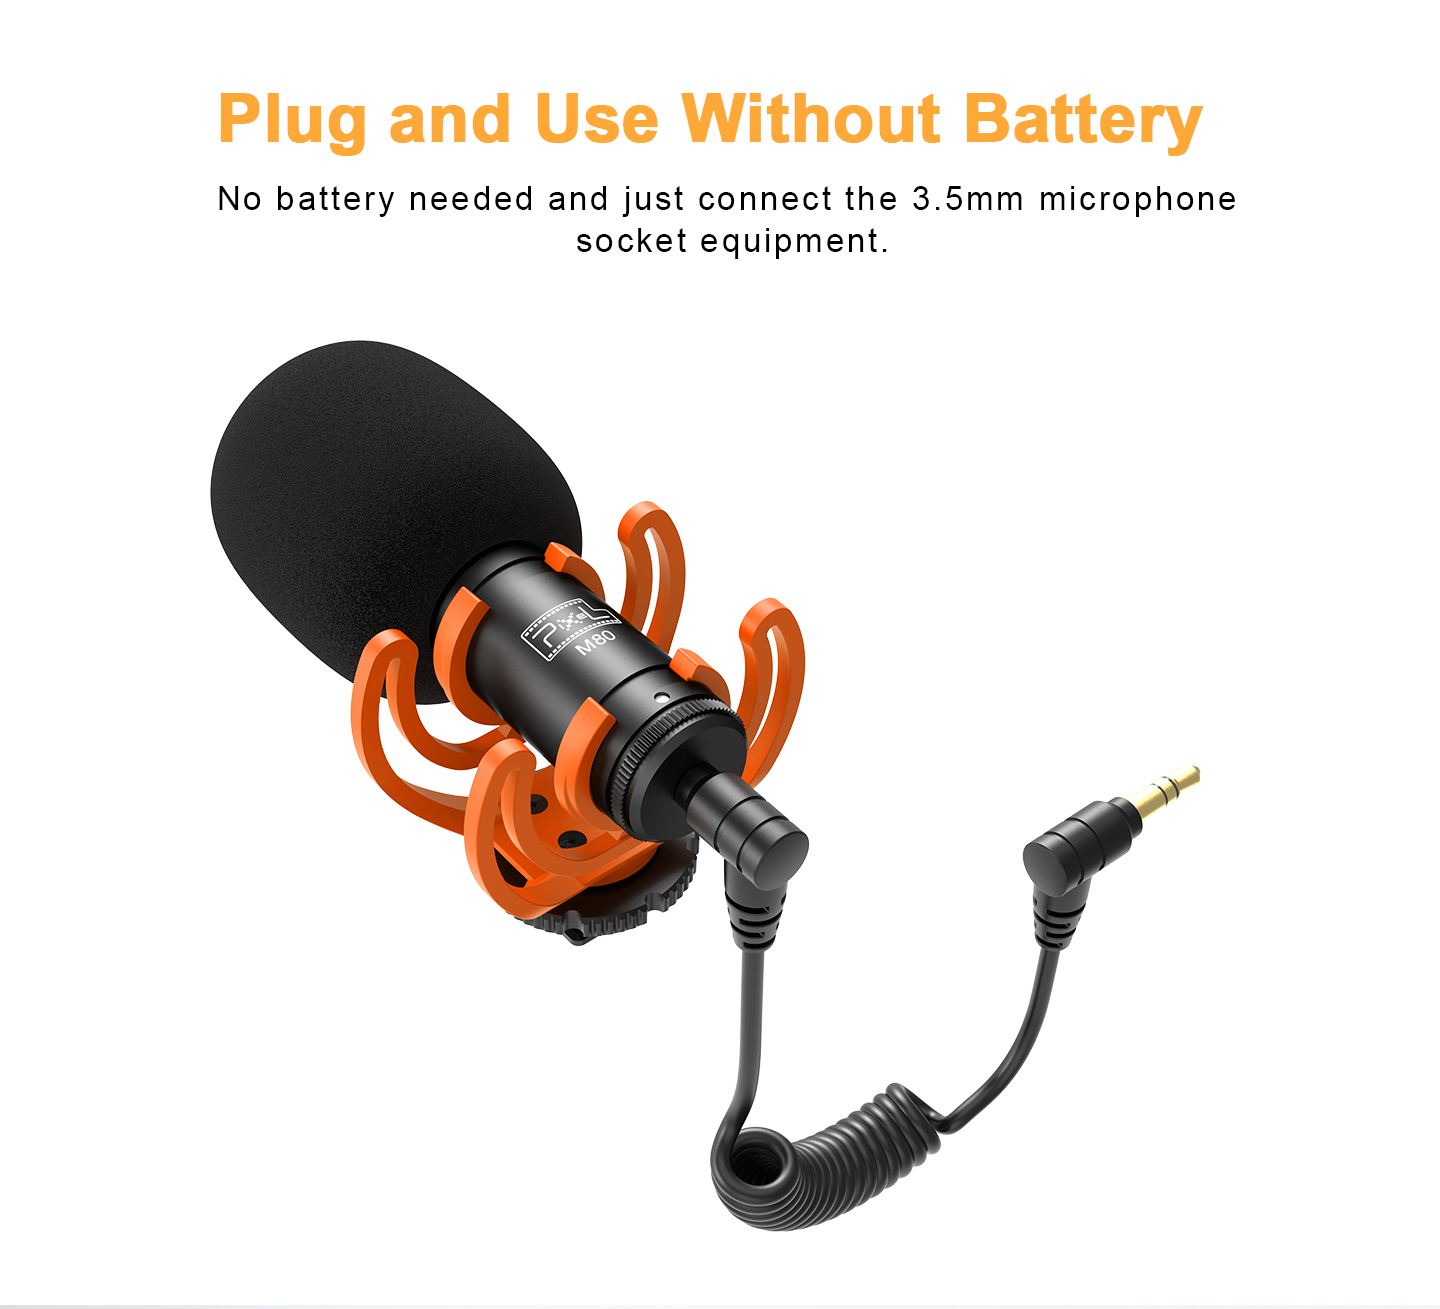 Plug and Use Without Battery